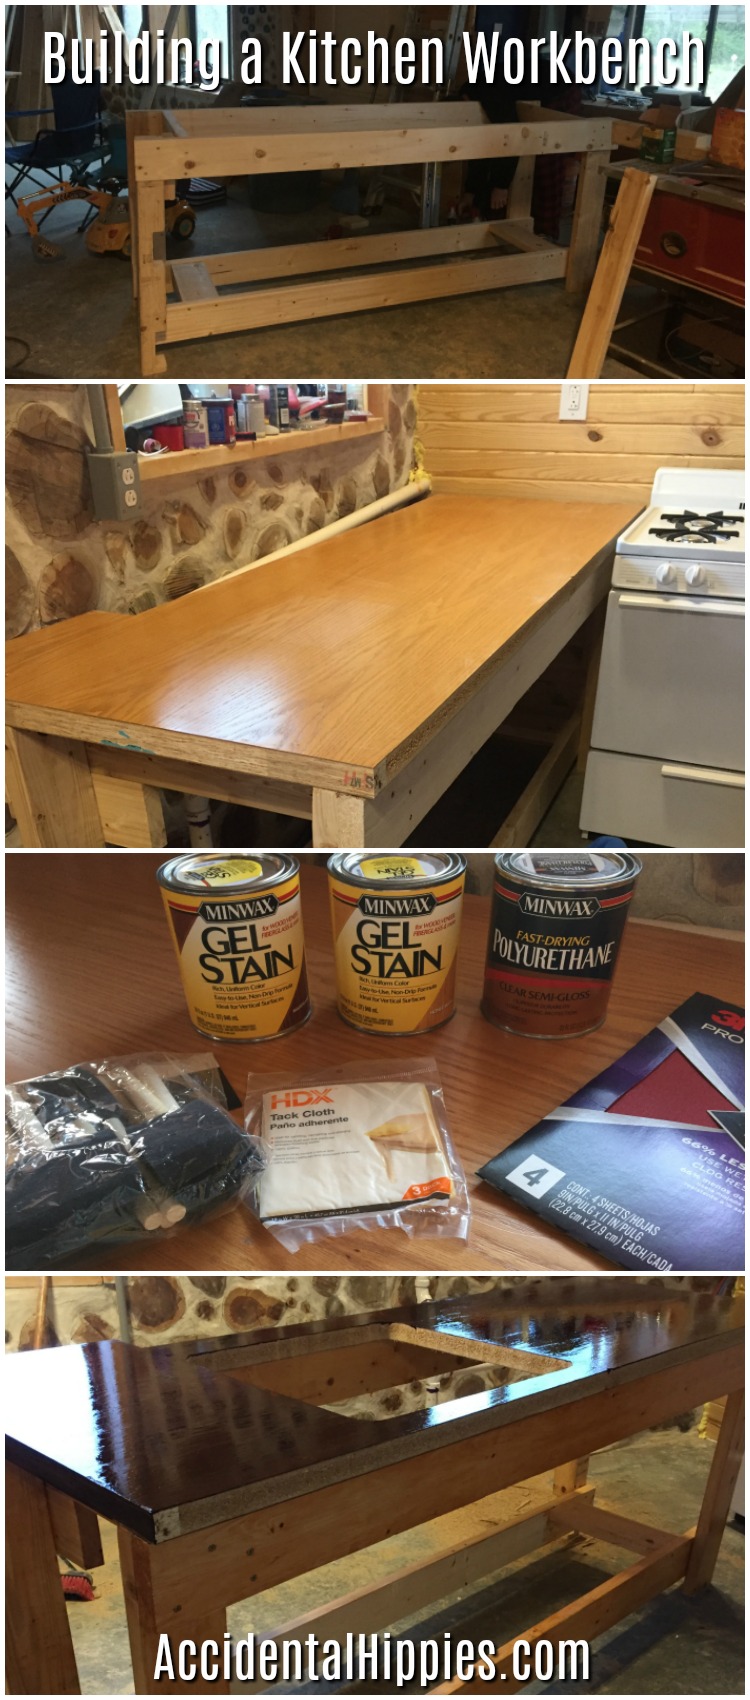 We built an easy and inexpensive workbench for our kitchen instead of using base cabinets.